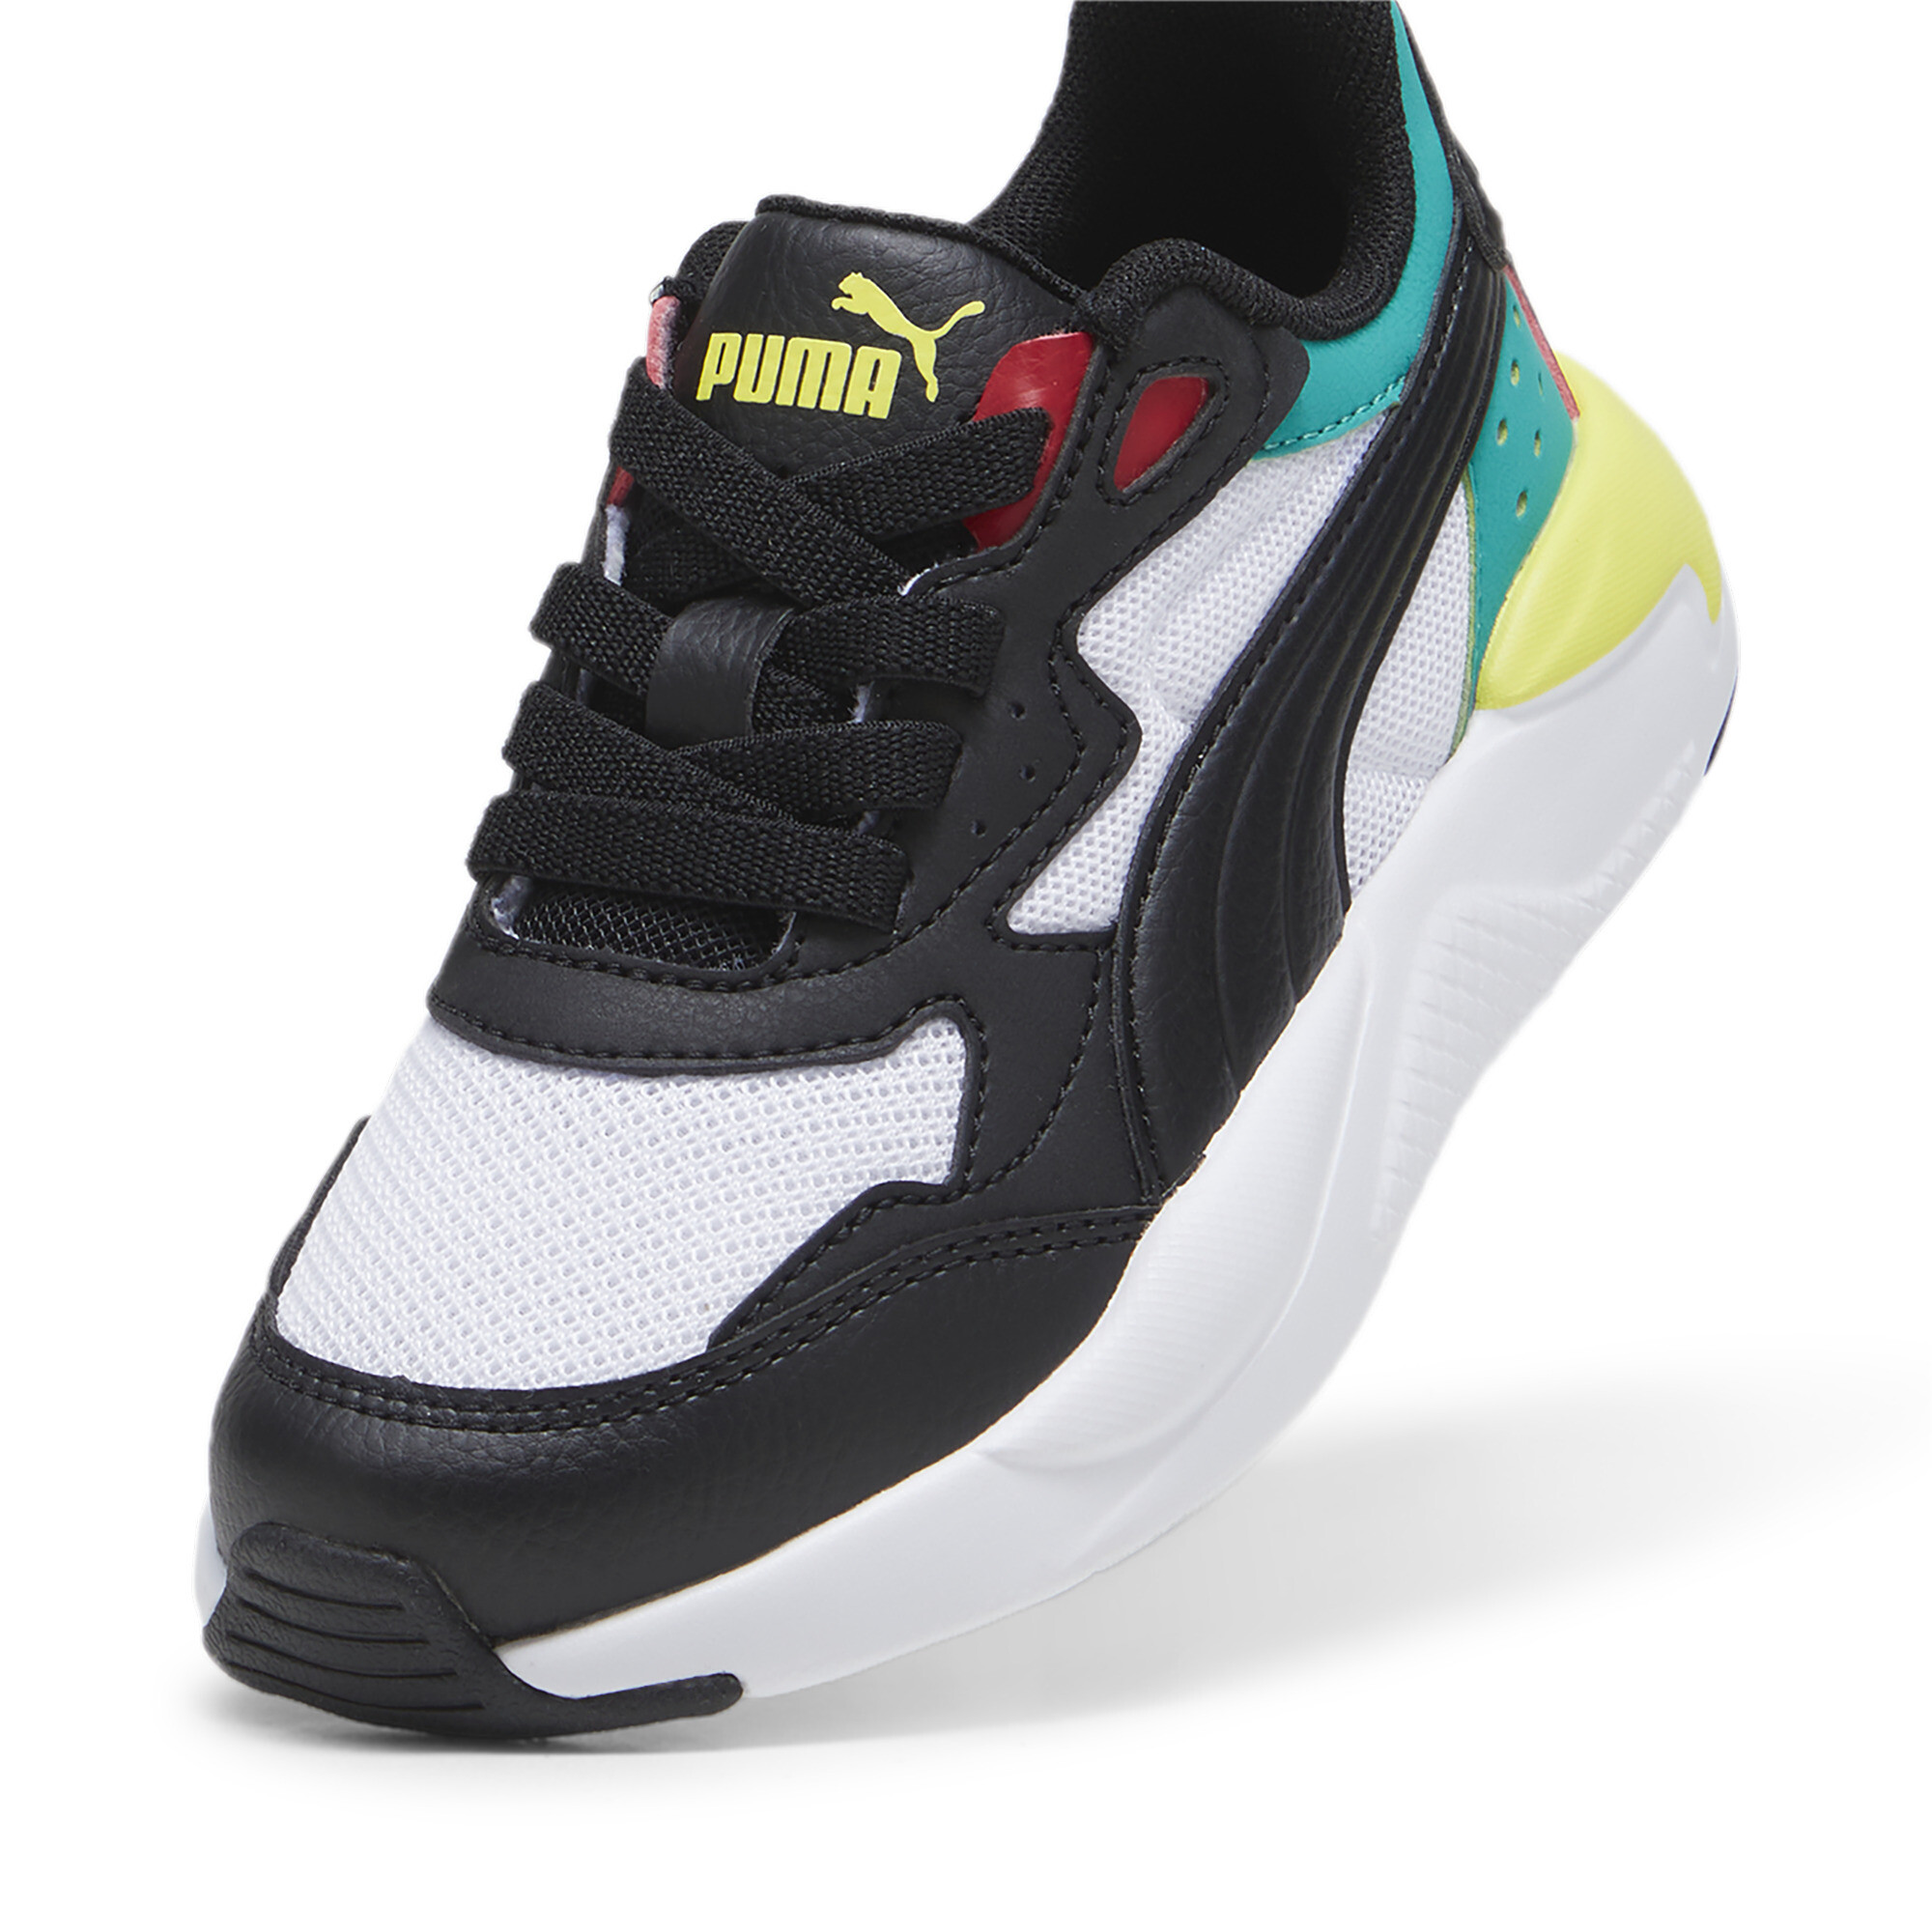 Puma X-Ray Speed AC Kids' Trainers, White, Size 27.5, Shoes